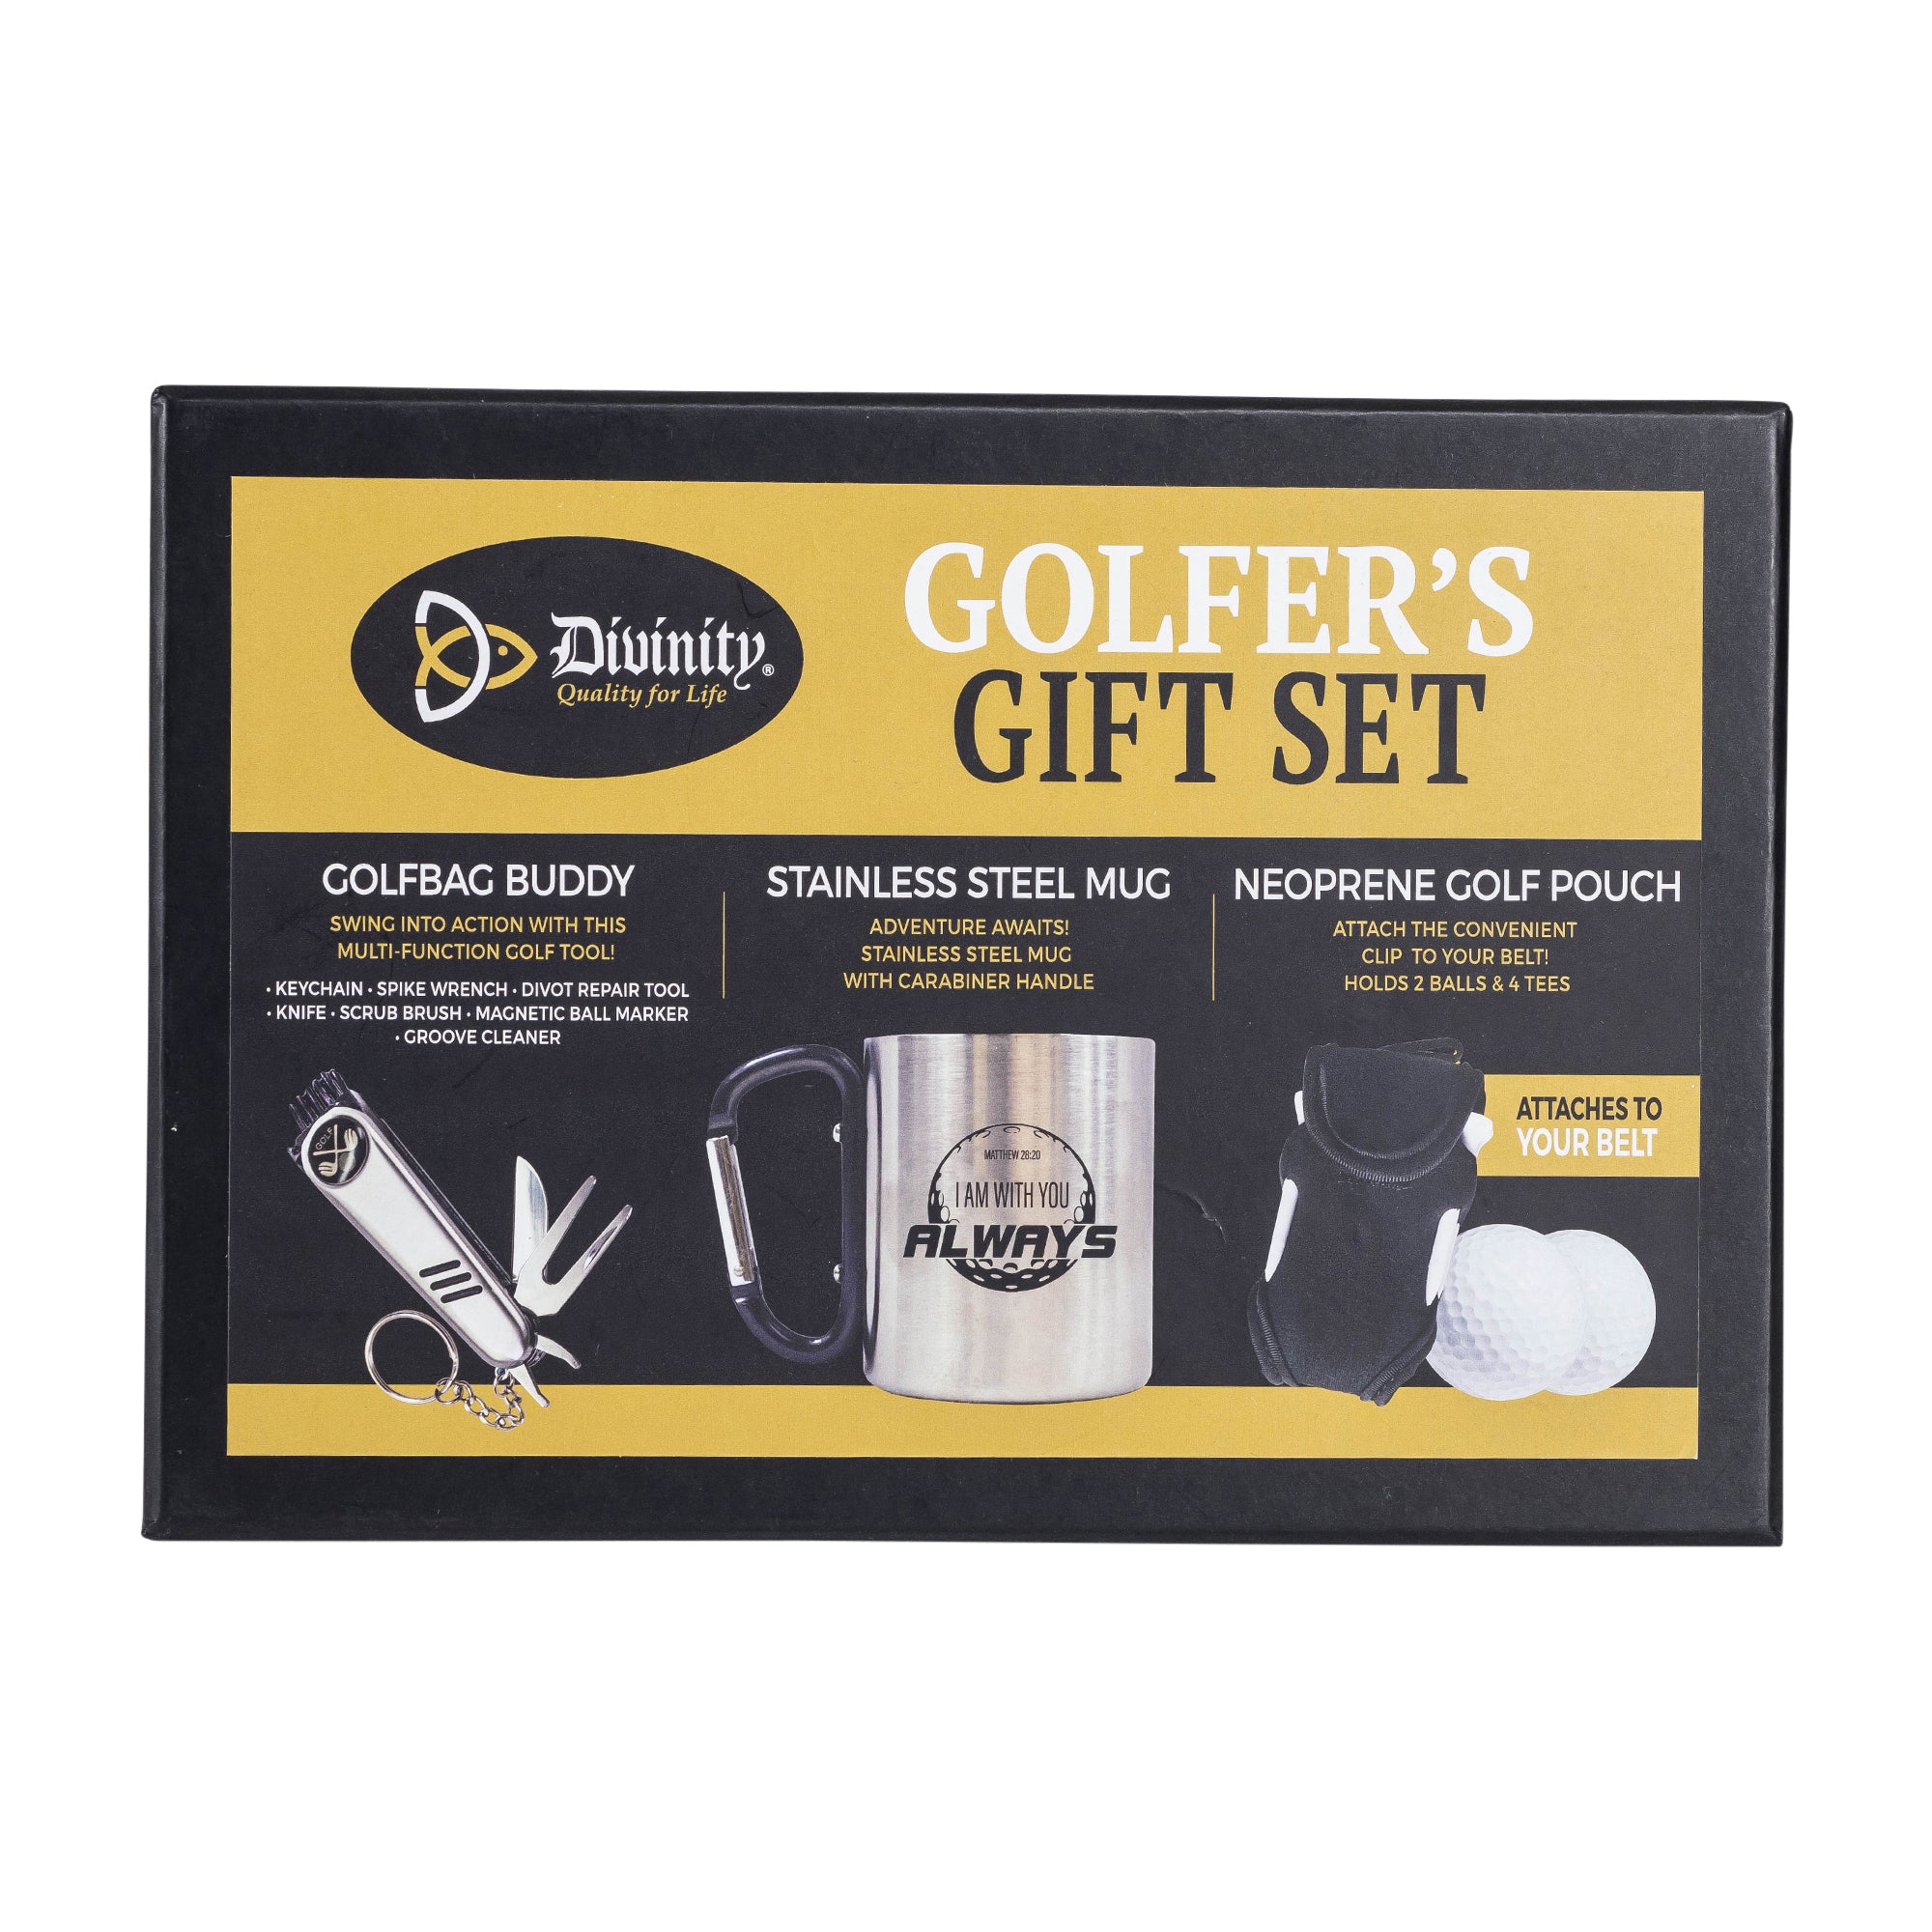 Golfer's Gift Set: I am With You - Matthew 28:20